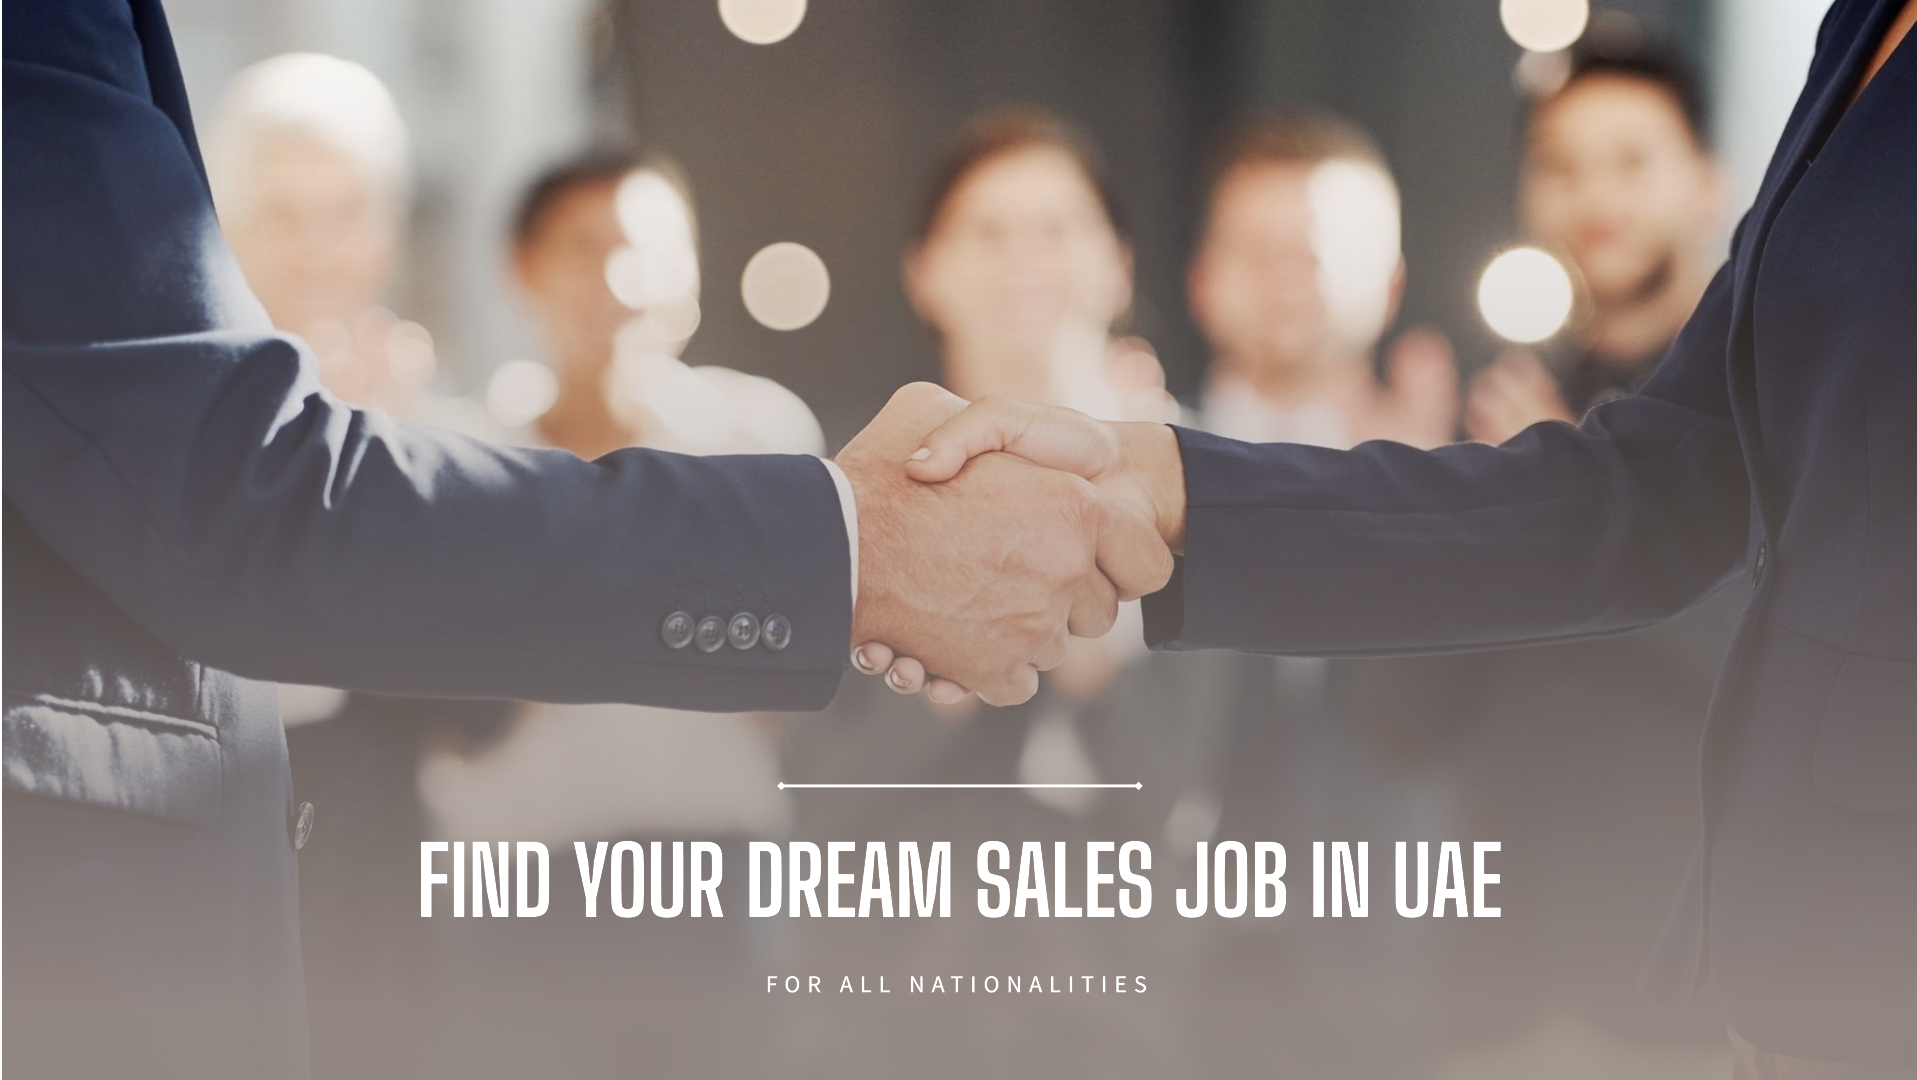 sales jobs in uae for all nationalities